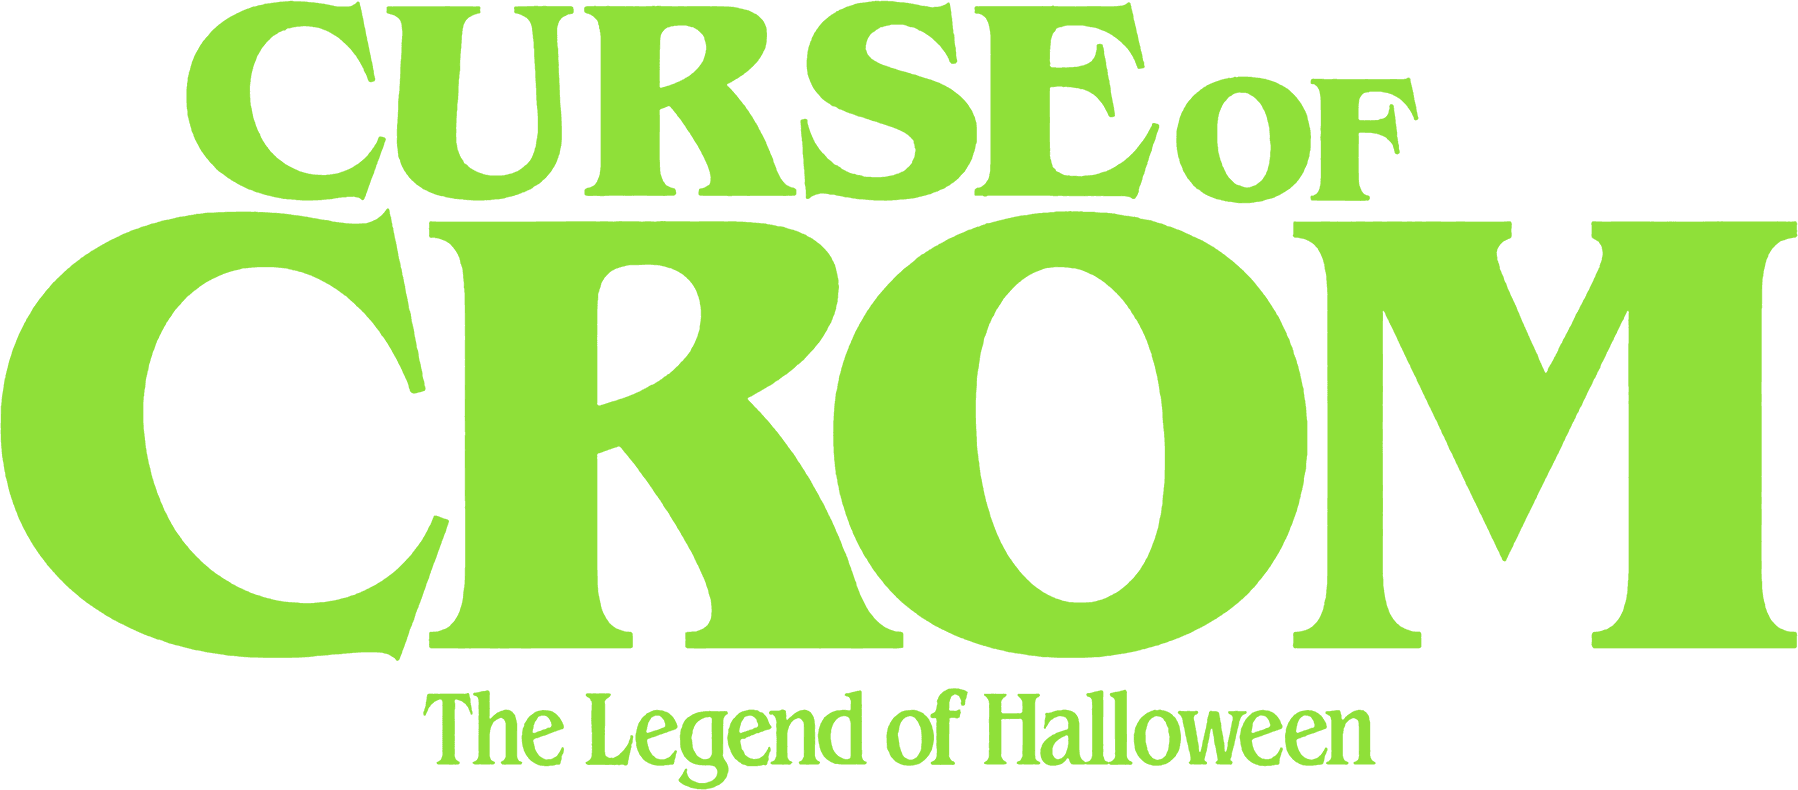 Curse of Crom: The Legend of Halloween logo